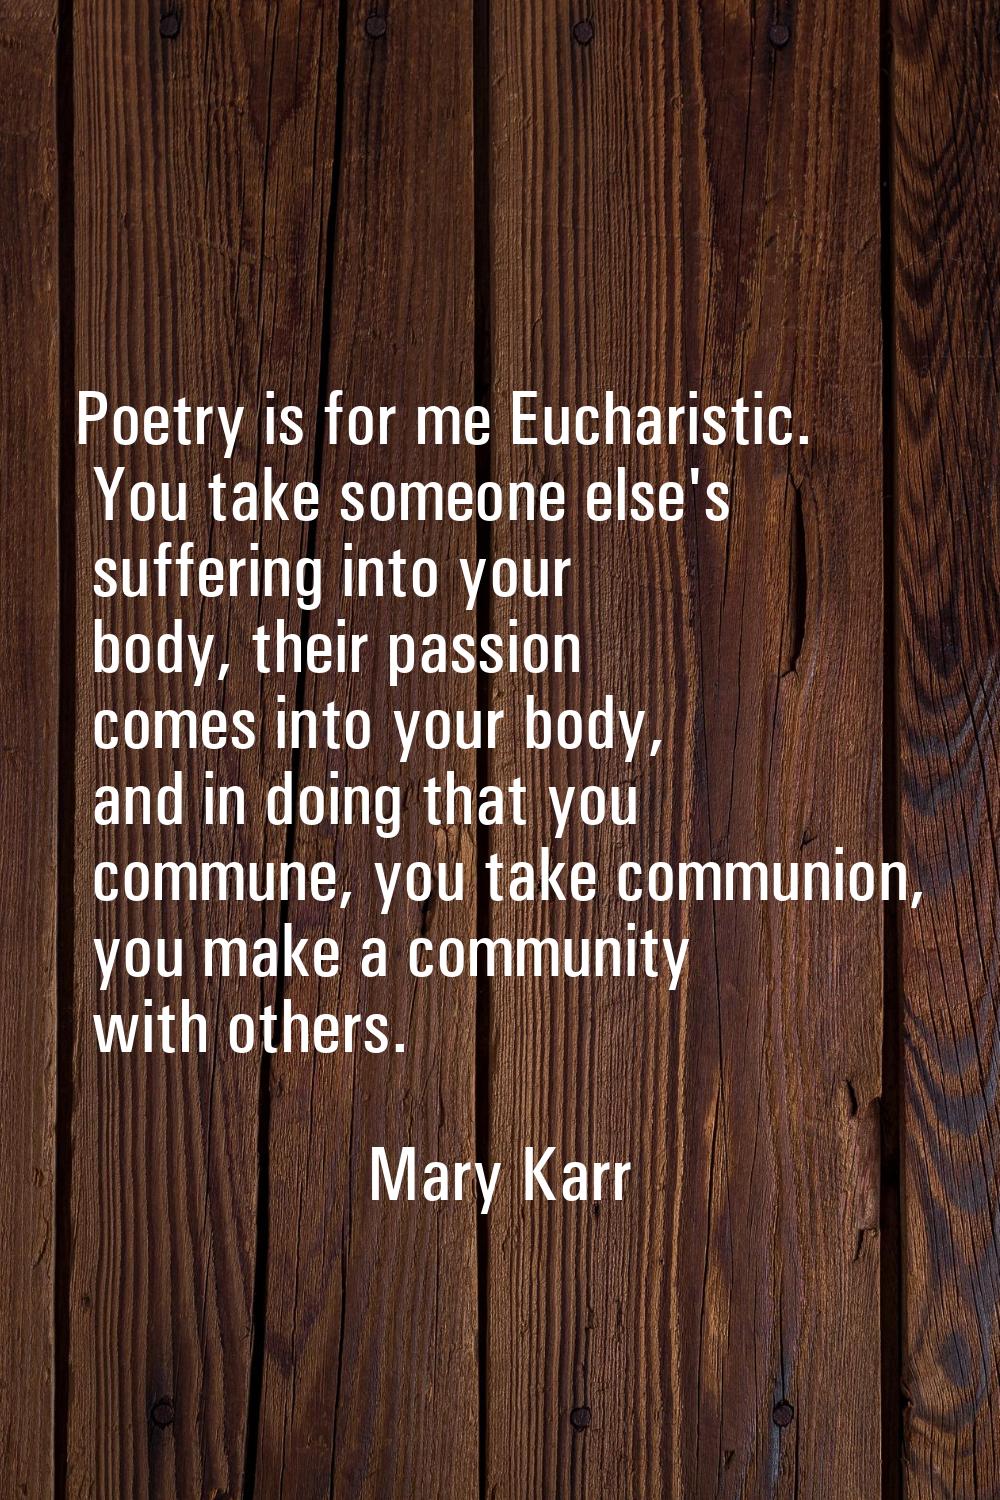 Poetry is for me Eucharistic. You take someone else's suffering into your body, their passion comes